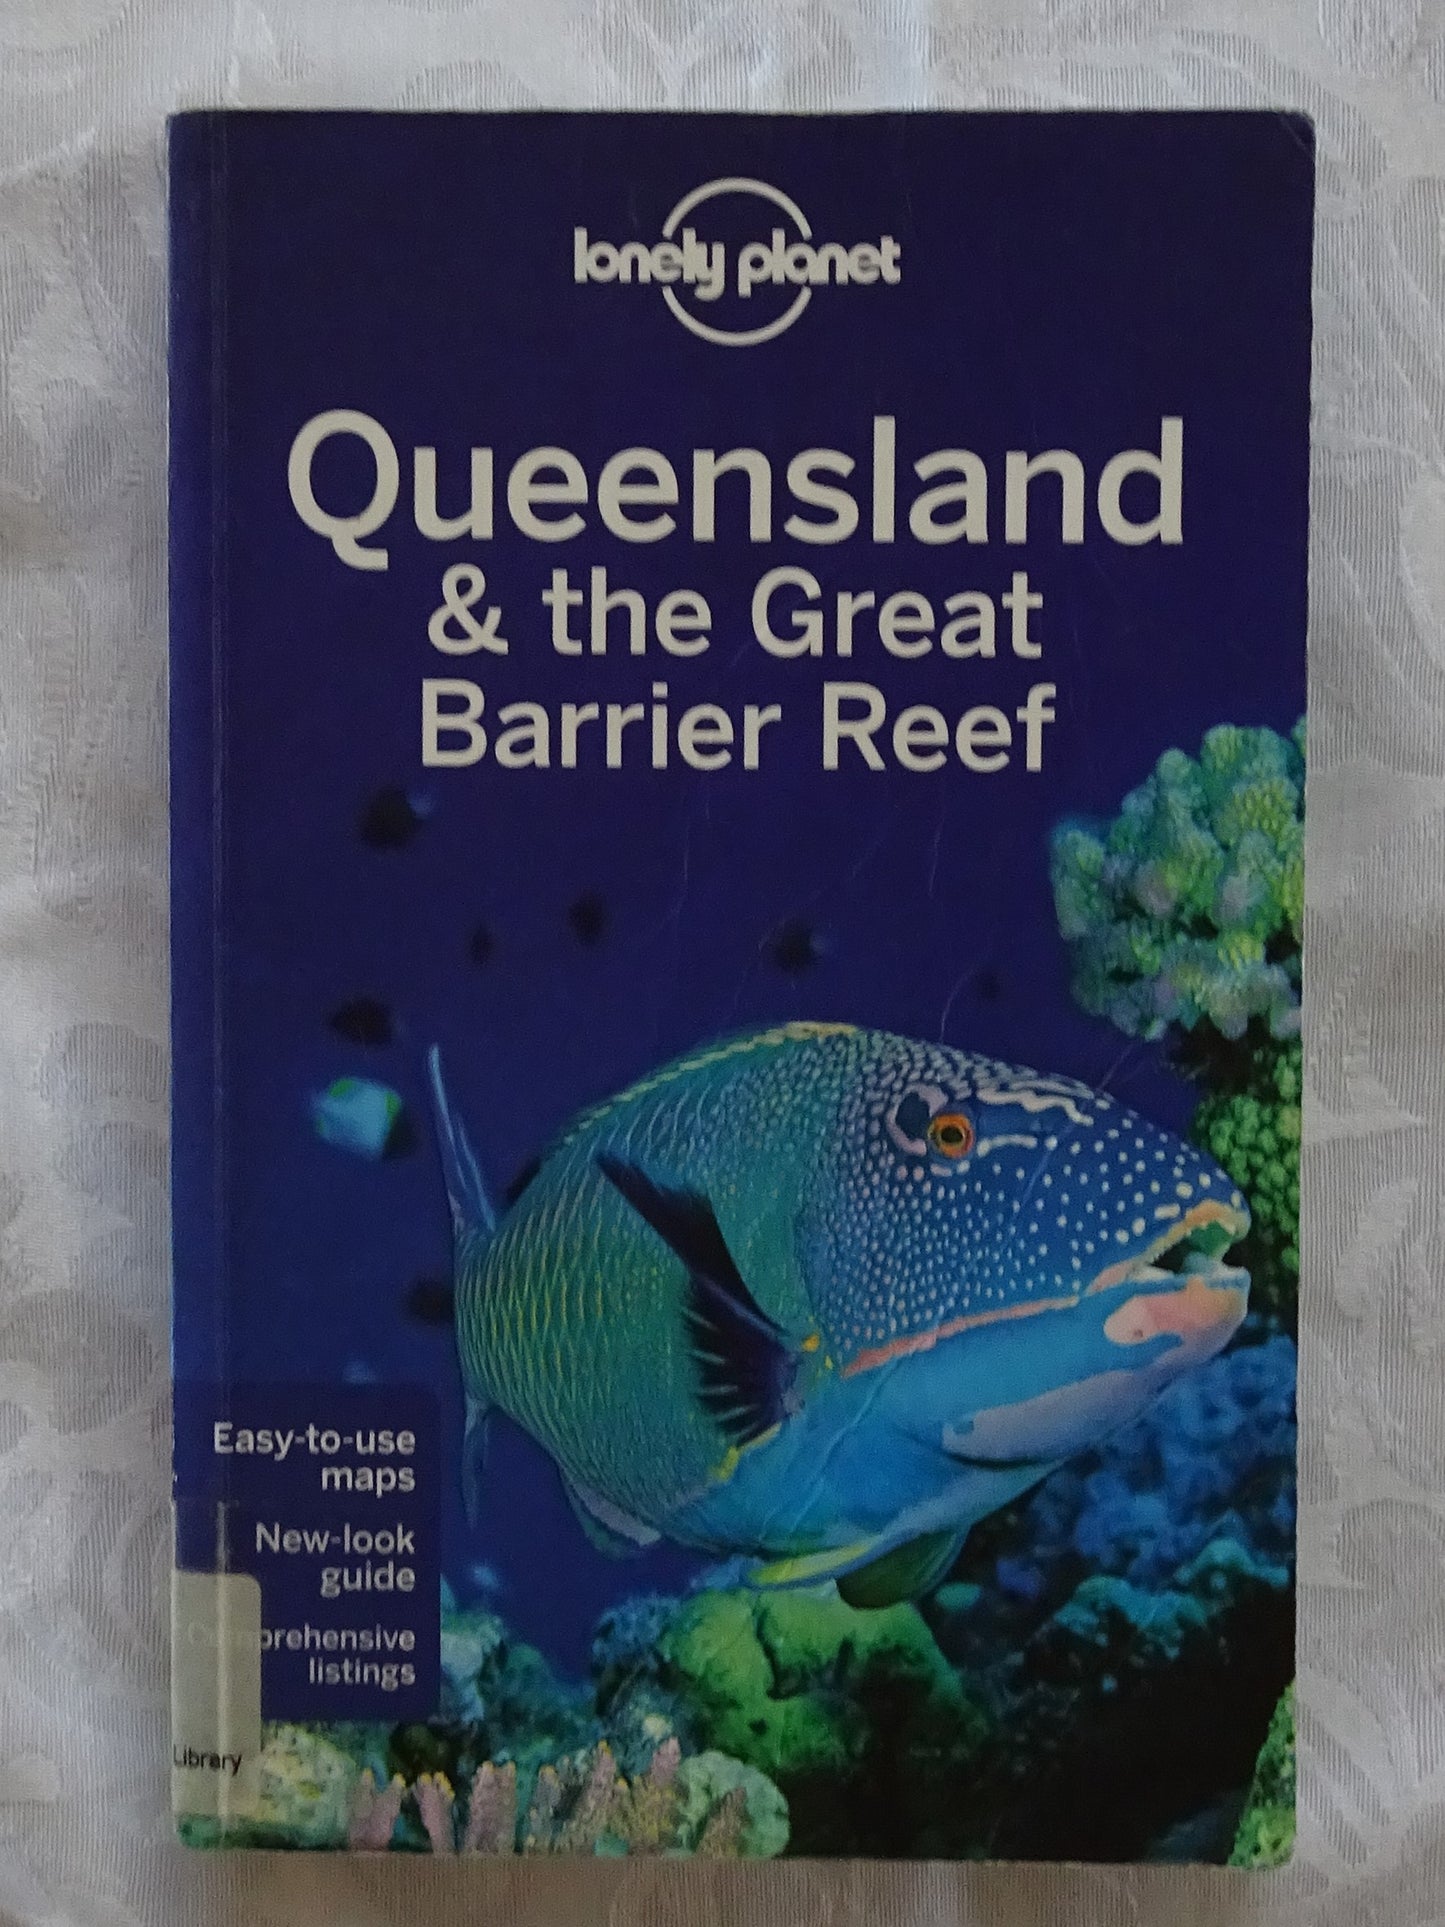 Queensland & The Great Barrier Reef by Lonely Planet